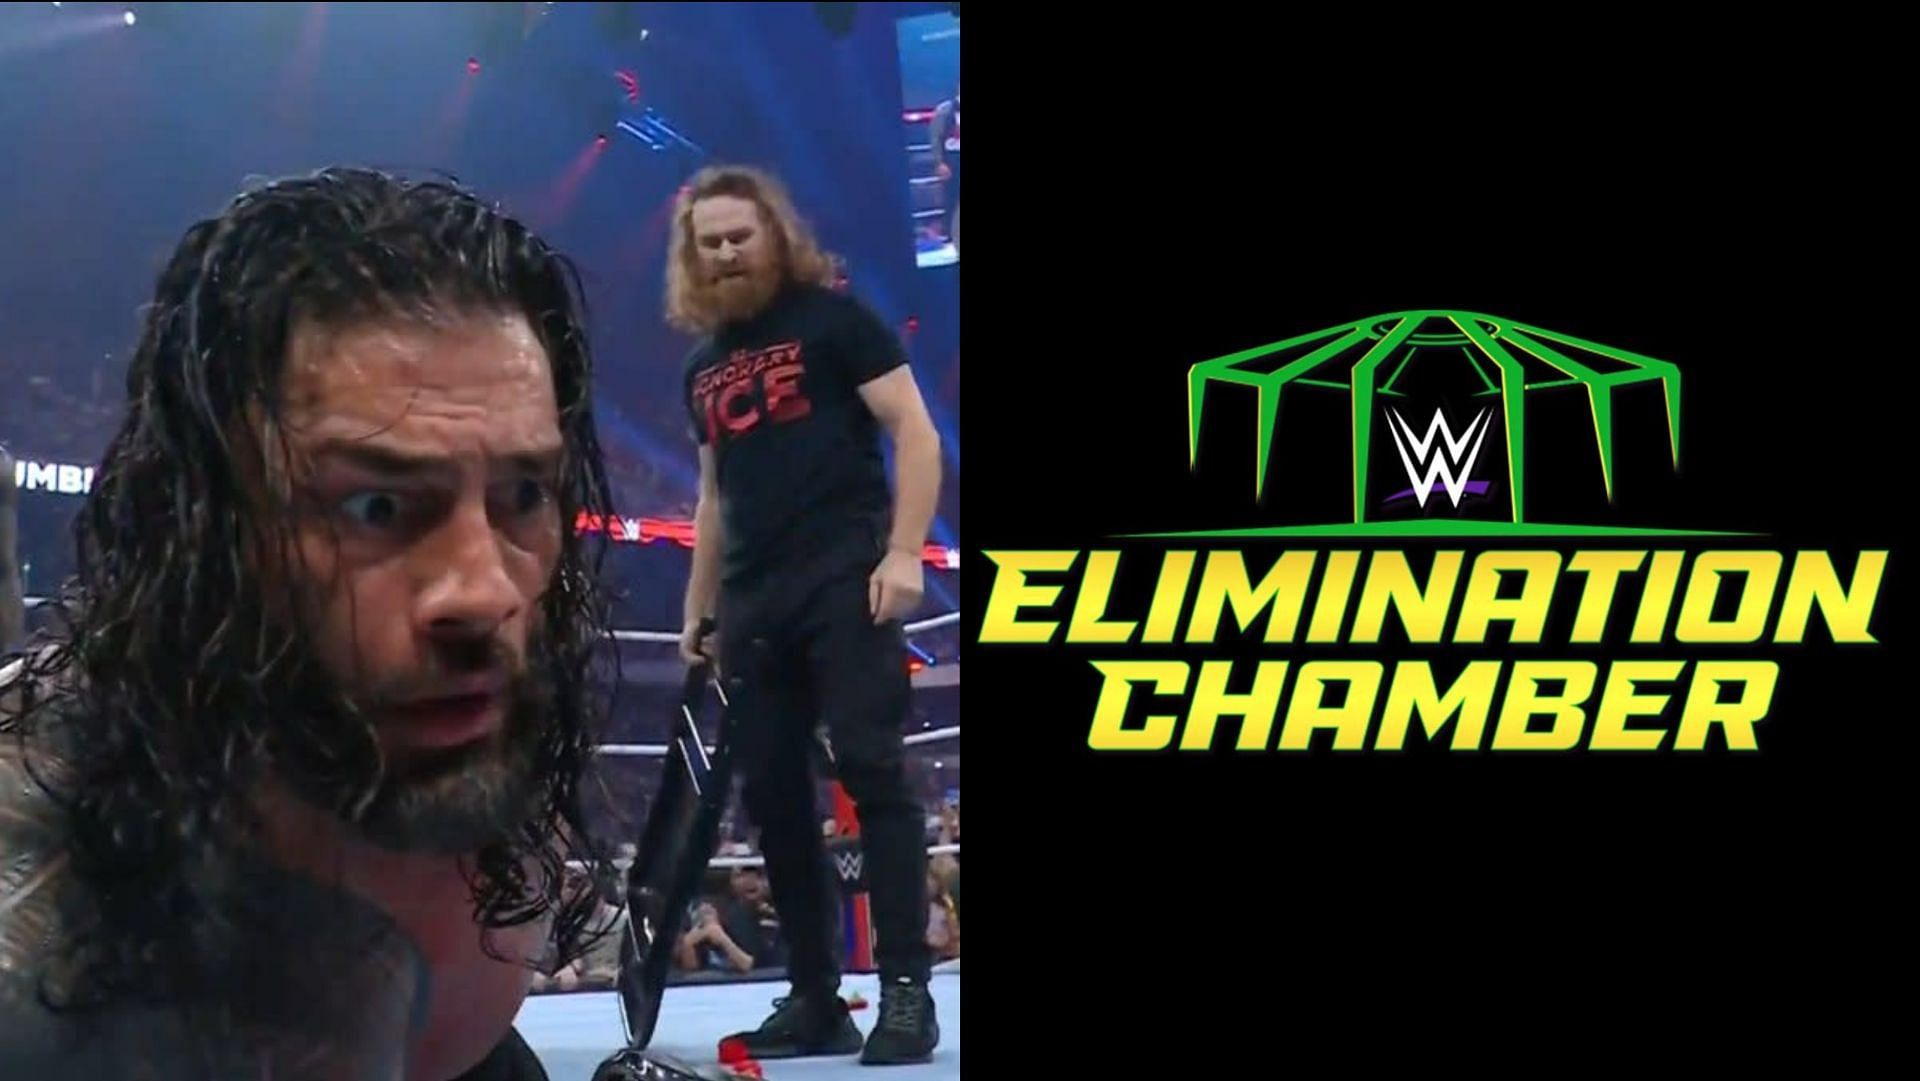 Looks like a Sami Zayn and Roman Reigns match is about to go down at Elimination Chamber